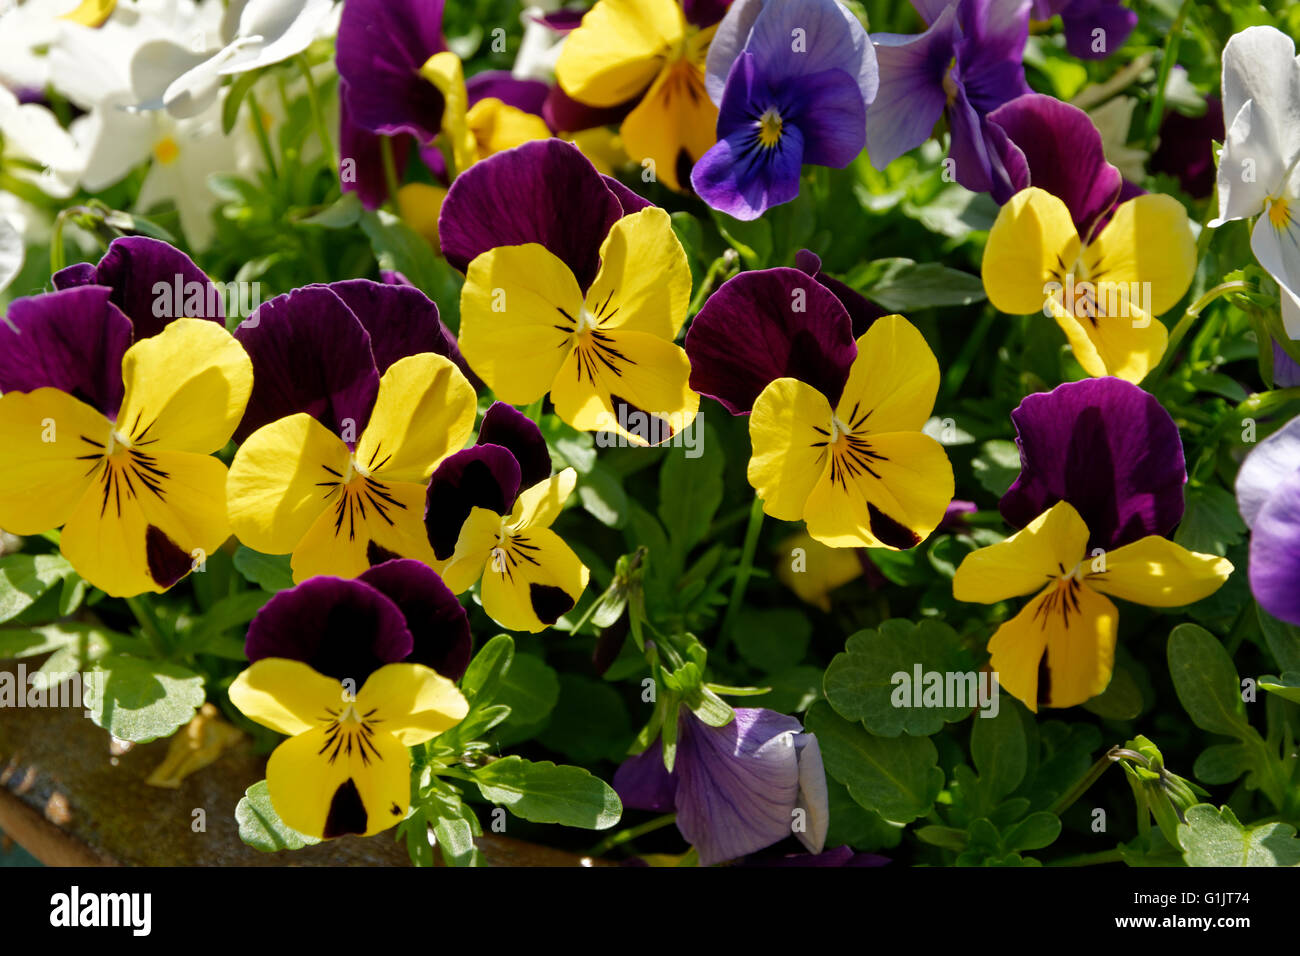 Yellow and Violet tricolor Pansies Stock Photo